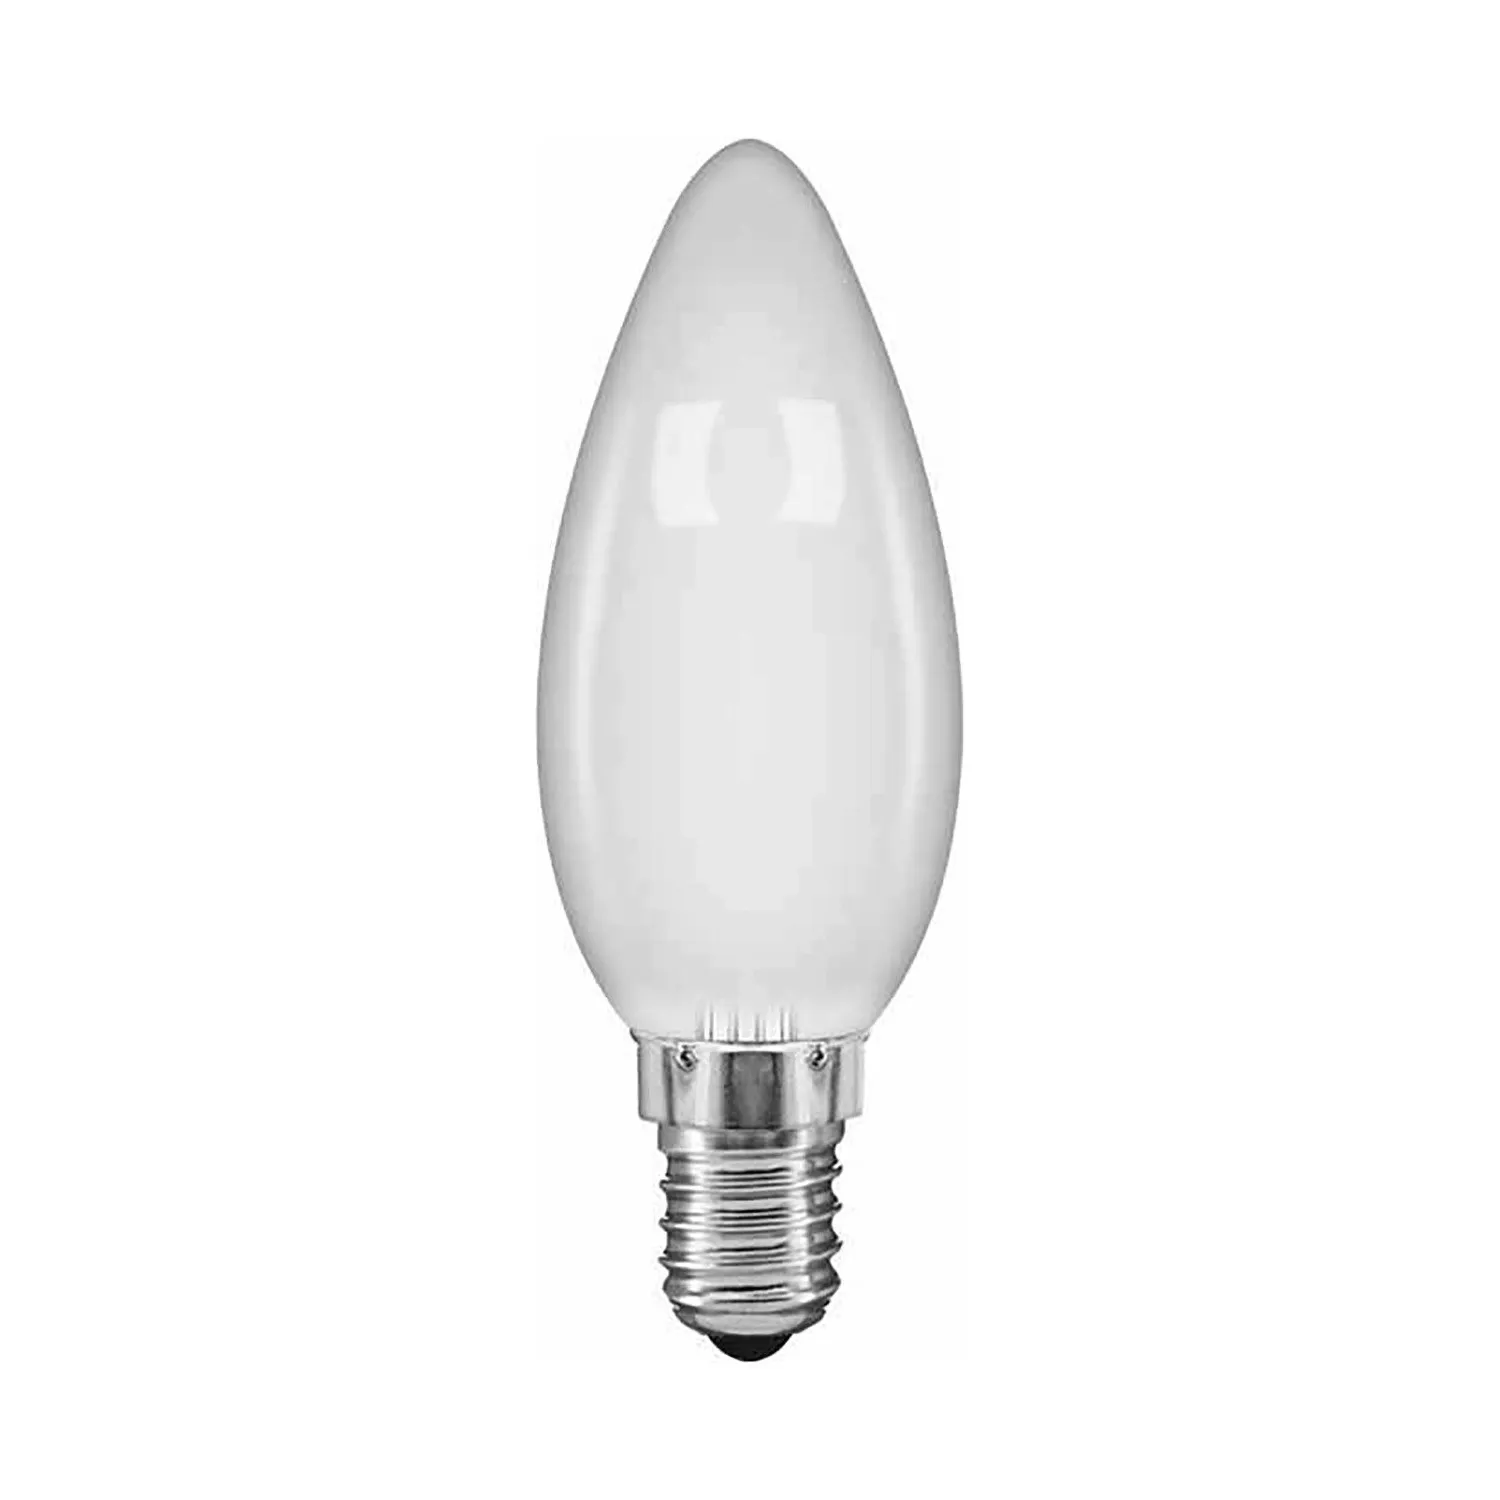 Candle 35mm E14 Opal 25W Incandescent T (100 10) 027414025